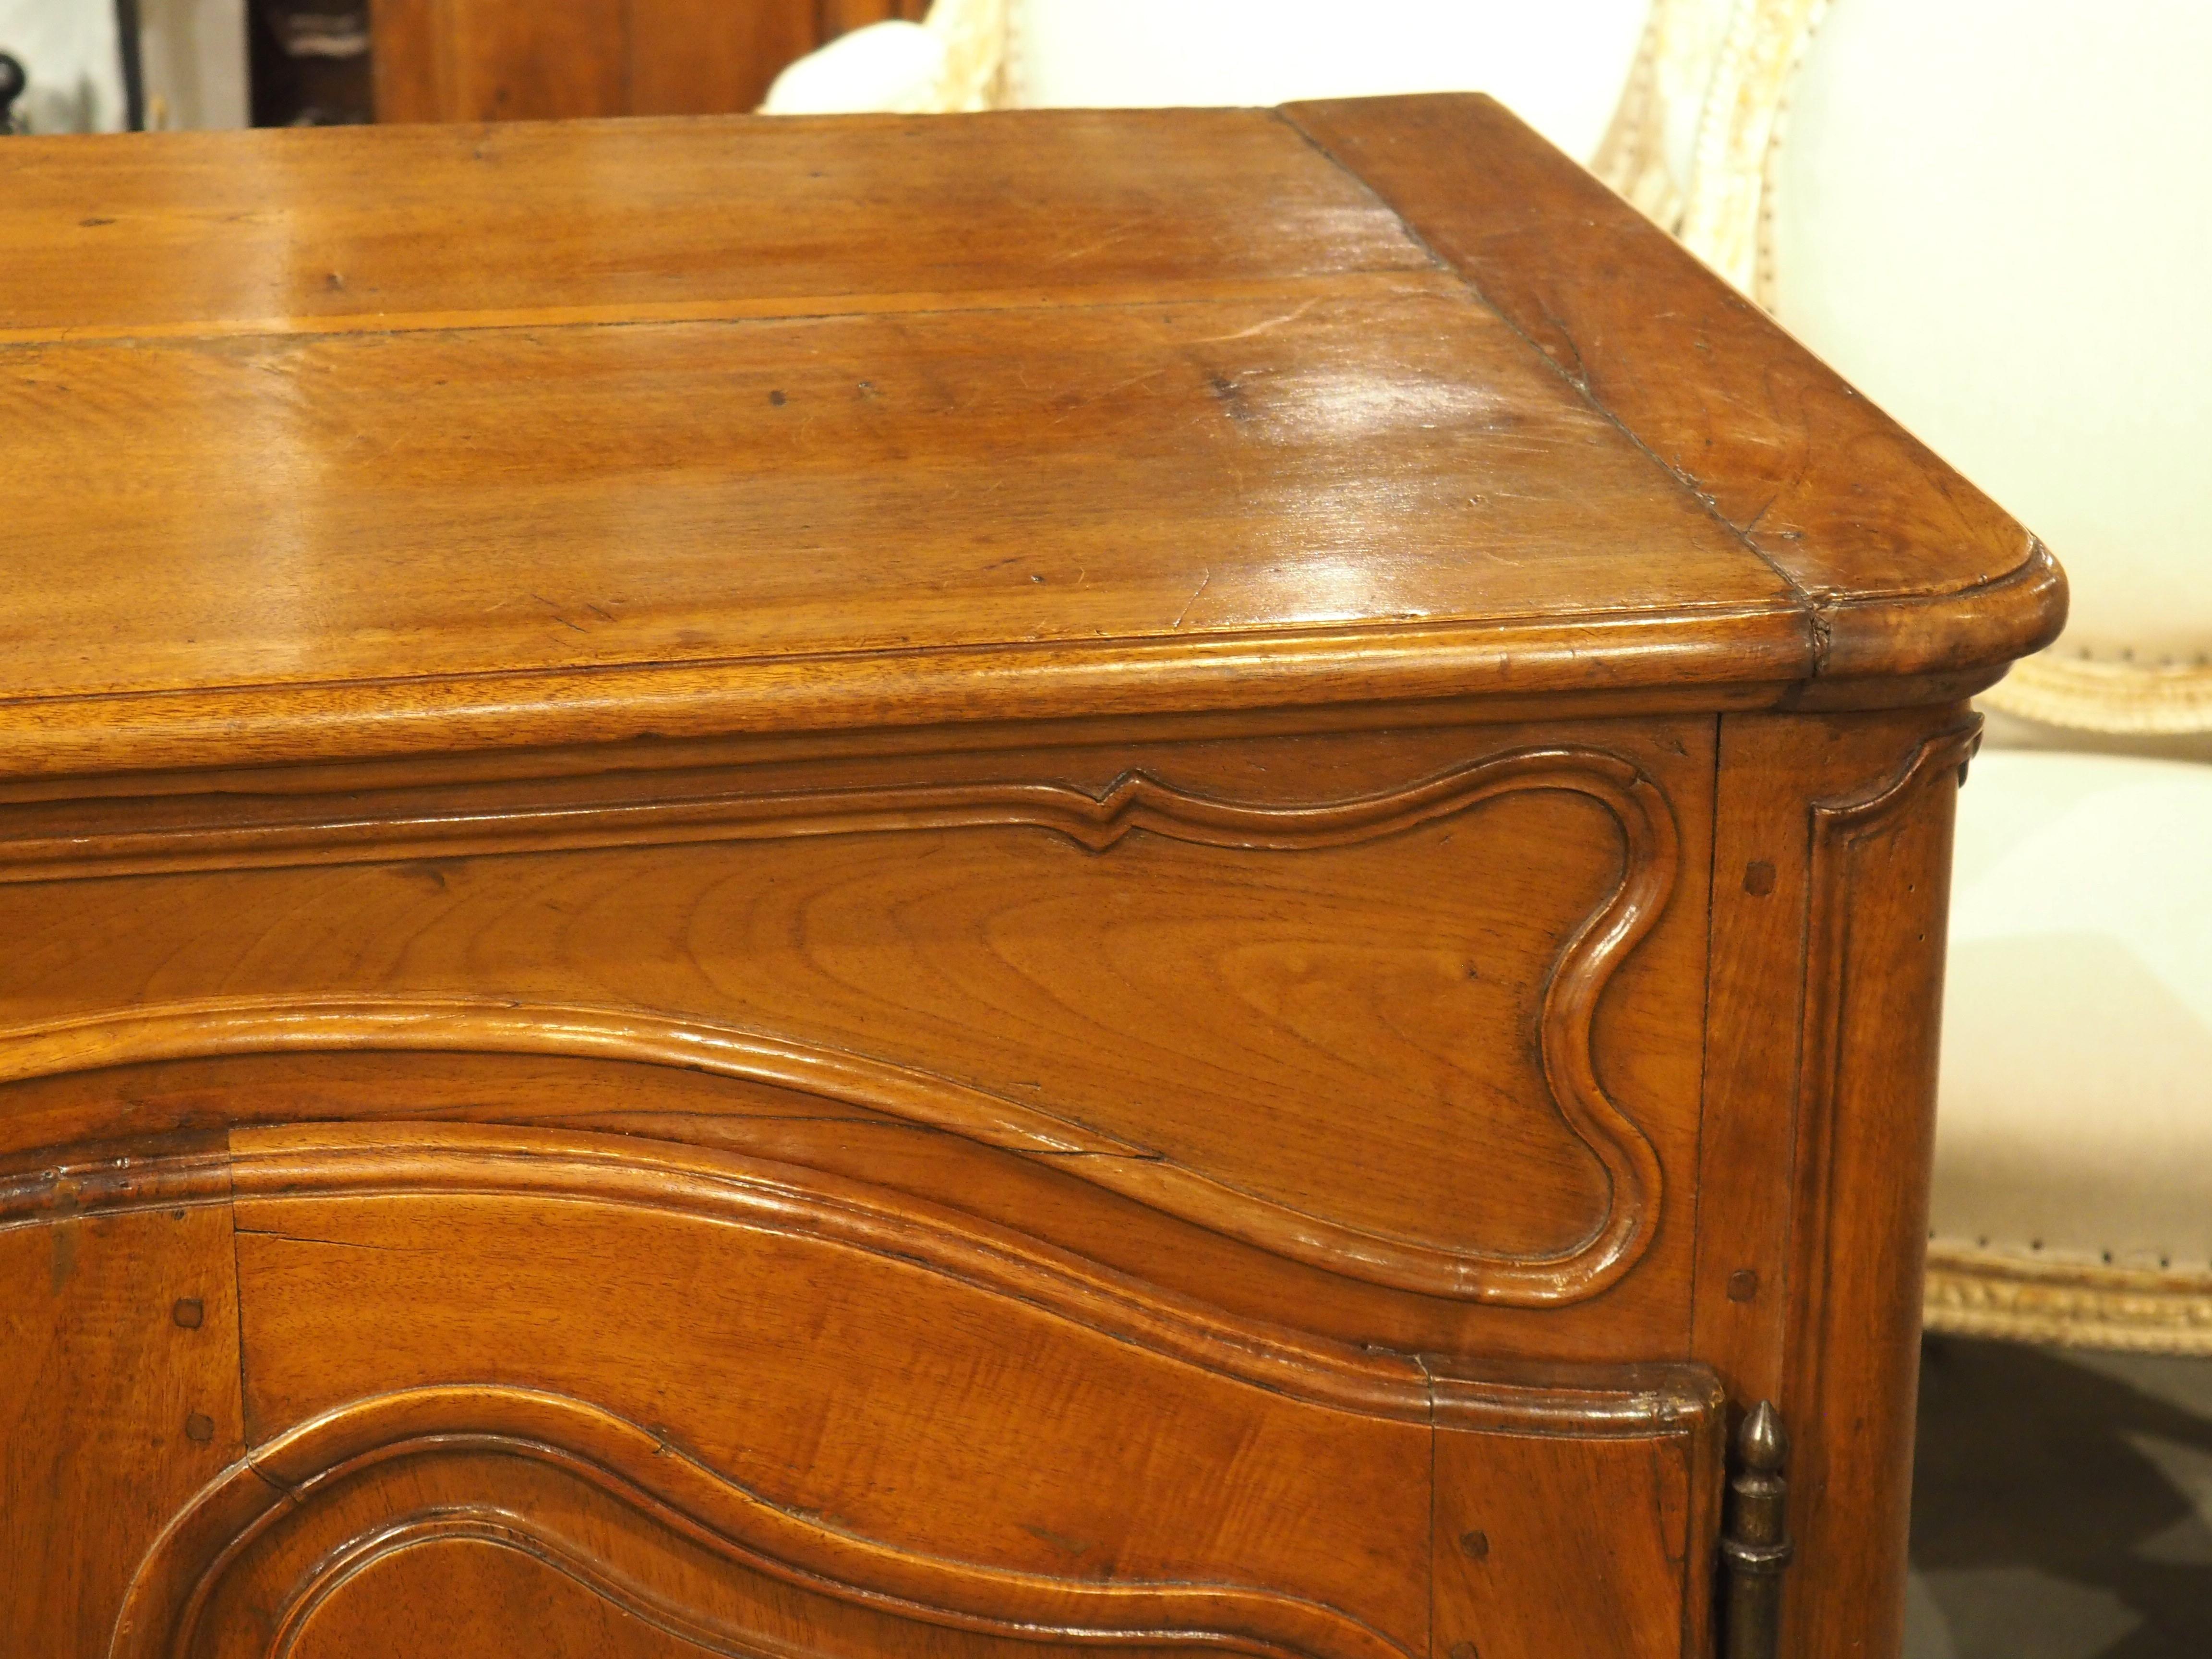 Hand-Carved Circa 1750 Carved Walnut Wood Buffet Crédence from Nîmes, France